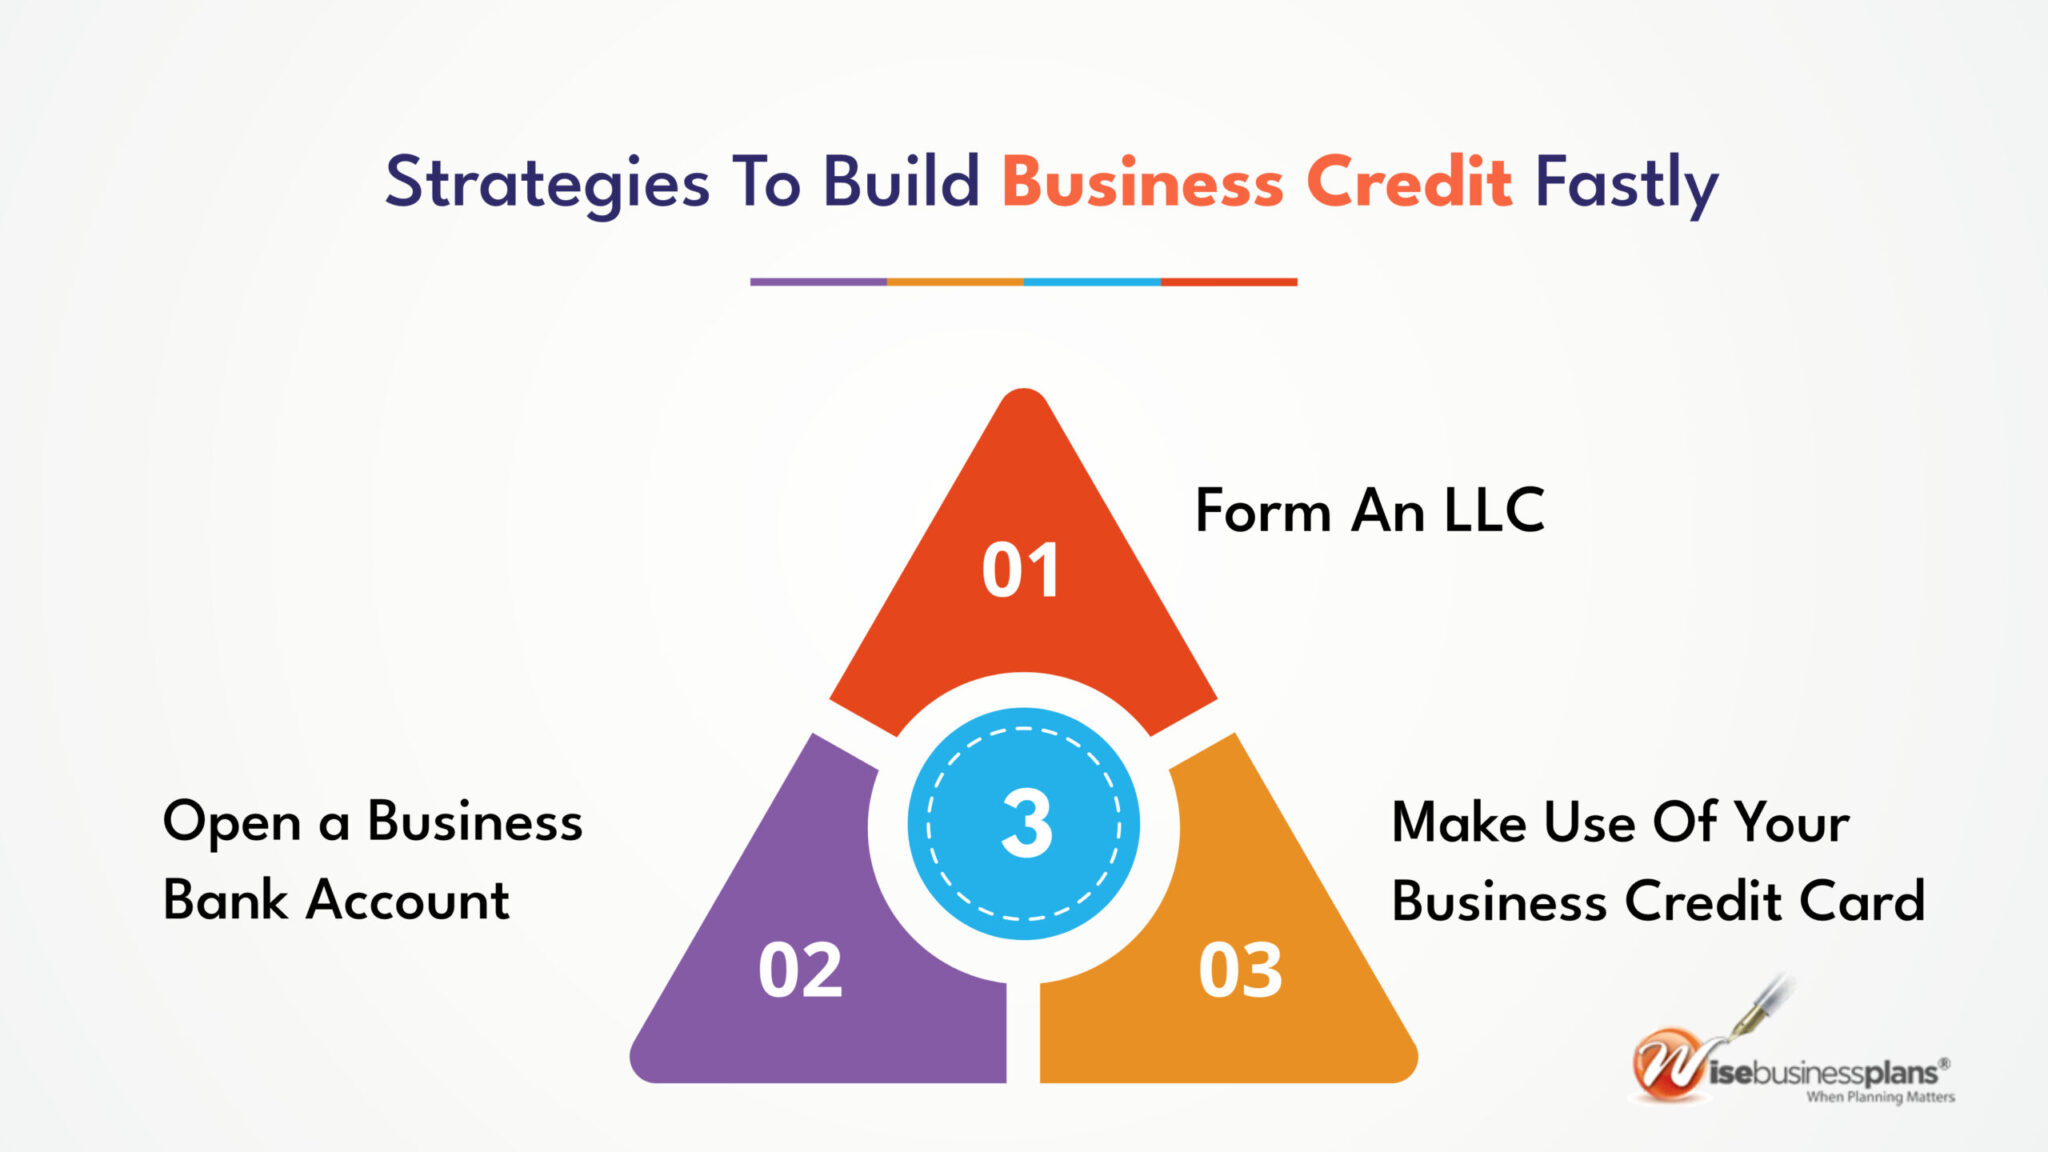 Strategies to build business credit fast by net 30 vendors